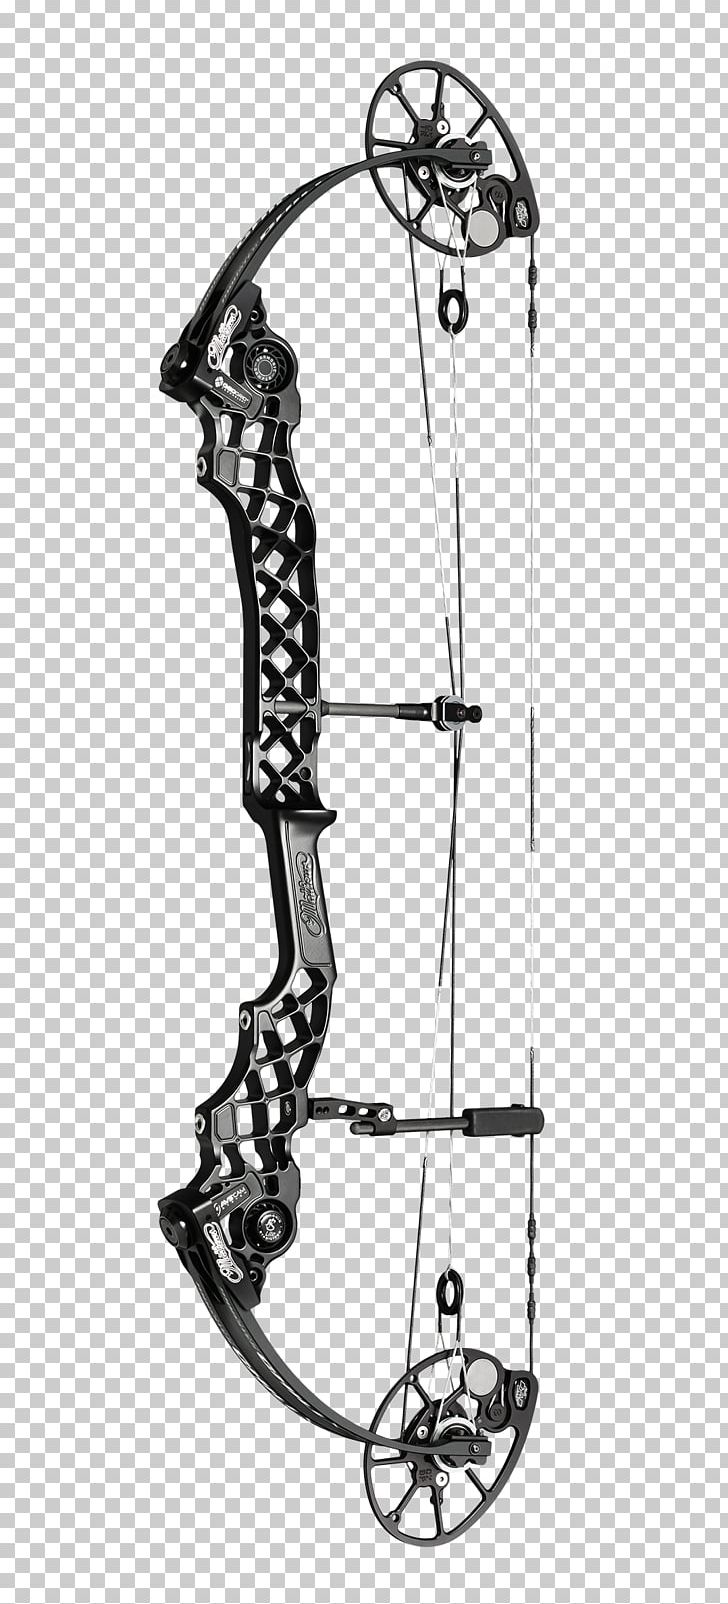 Bow And Arrow Compound Bows Cam Archery PNG, Clipart, Archery, Arrow, Auto Part, Black And White, Bow Free PNG Download